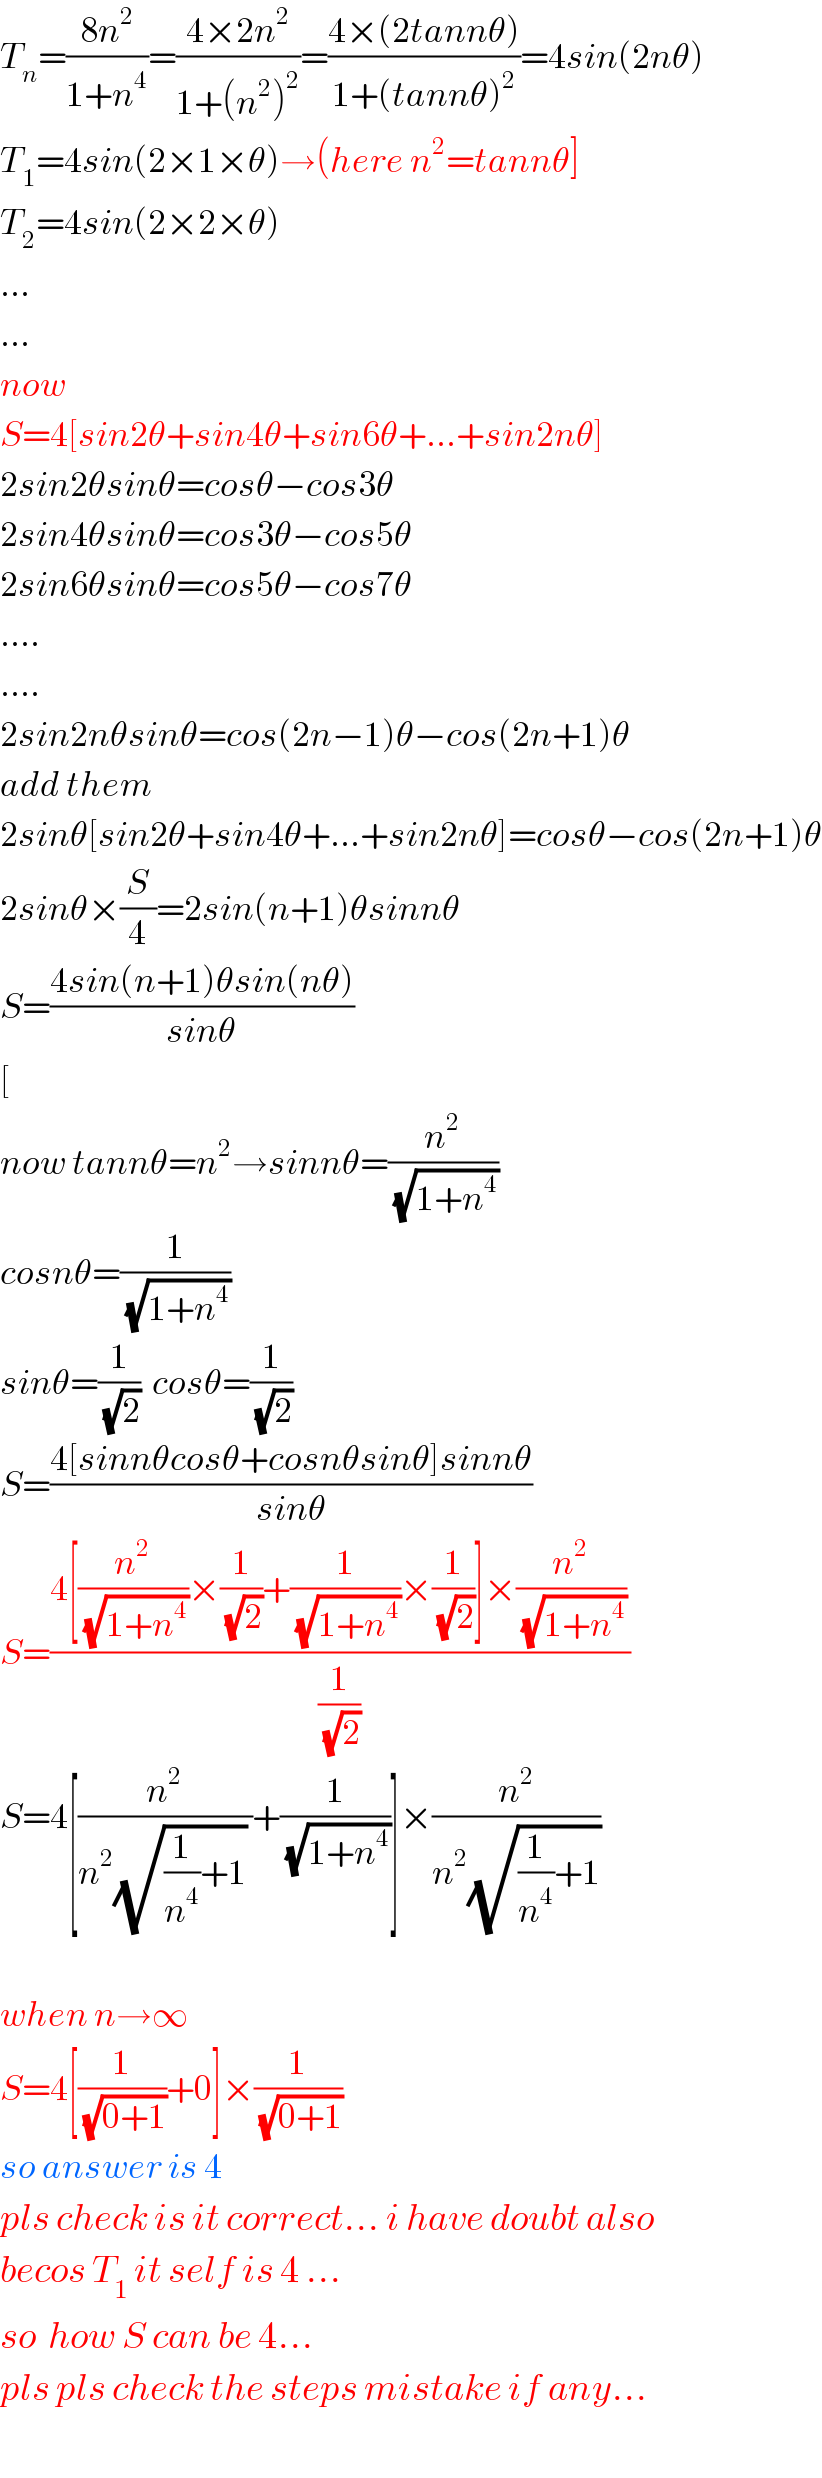 T_n =((8n^2 )/(1+n^4 ))=((4×2n^2 )/(1+(n^2 )^2 ))=((4×(2tannθ))/(1+(tannθ)^2 ))=4sin(2nθ)  T_1 =4sin(2×1×θ)→(here n^2 =tannθ]  T_2 =4sin(2×2×θ)  ...  ...  now  S=4[sin2θ+sin4θ+sin6θ+...+sin2nθ]  2sin2θsinθ=cosθ−cos3θ  2sin4θsinθ=cos3θ−cos5θ  2sin6θsinθ=cos5θ−cos7θ  ....  ....  2sin2nθsinθ=cos(2n−1)θ−cos(2n+1)θ  add them  2sinθ[sin2θ+sin4θ+...+sin2nθ]=cosθ−cos(2n+1)θ  2sinθ×(S/4)=2sin(n+1)θsinnθ  S=((4sin(n+1)θsin(nθ))/(sinθ))  [  now tannθ=n^2 →sinnθ=(n^2 /(√(1+n^4 )))  cosnθ=(1/(√(1+n^4 )))  sinθ=(1/(√2))  cosθ=(1/(√2))  S=((4[sinnθcosθ+cosnθsinθ]sinnθ)/(sinθ))  S=((4[(n^2 /(√(1+n^4 )))×(1/(√2))+(1/(√(1+n^4 )))×(1/(√2))]×(n^2 /(√(1+n^4 ))))/(1/(√2)))  S=4[(n^2 /(n^2 (√((1/n^4 )+1)) ))+(1/(√(1+n^4 )))]×(n^2 /(n^2 (√((1/n^4 )+1))))    when n→∞  S=4[(1/(√(0+1)))+0]×(1/(√(0+1)))  so answer is 4  pls check is it correct... i have doubt also  becos T_1  it self is 4 ...  so  how S can be 4...  pls pls check the steps mistake if any...  